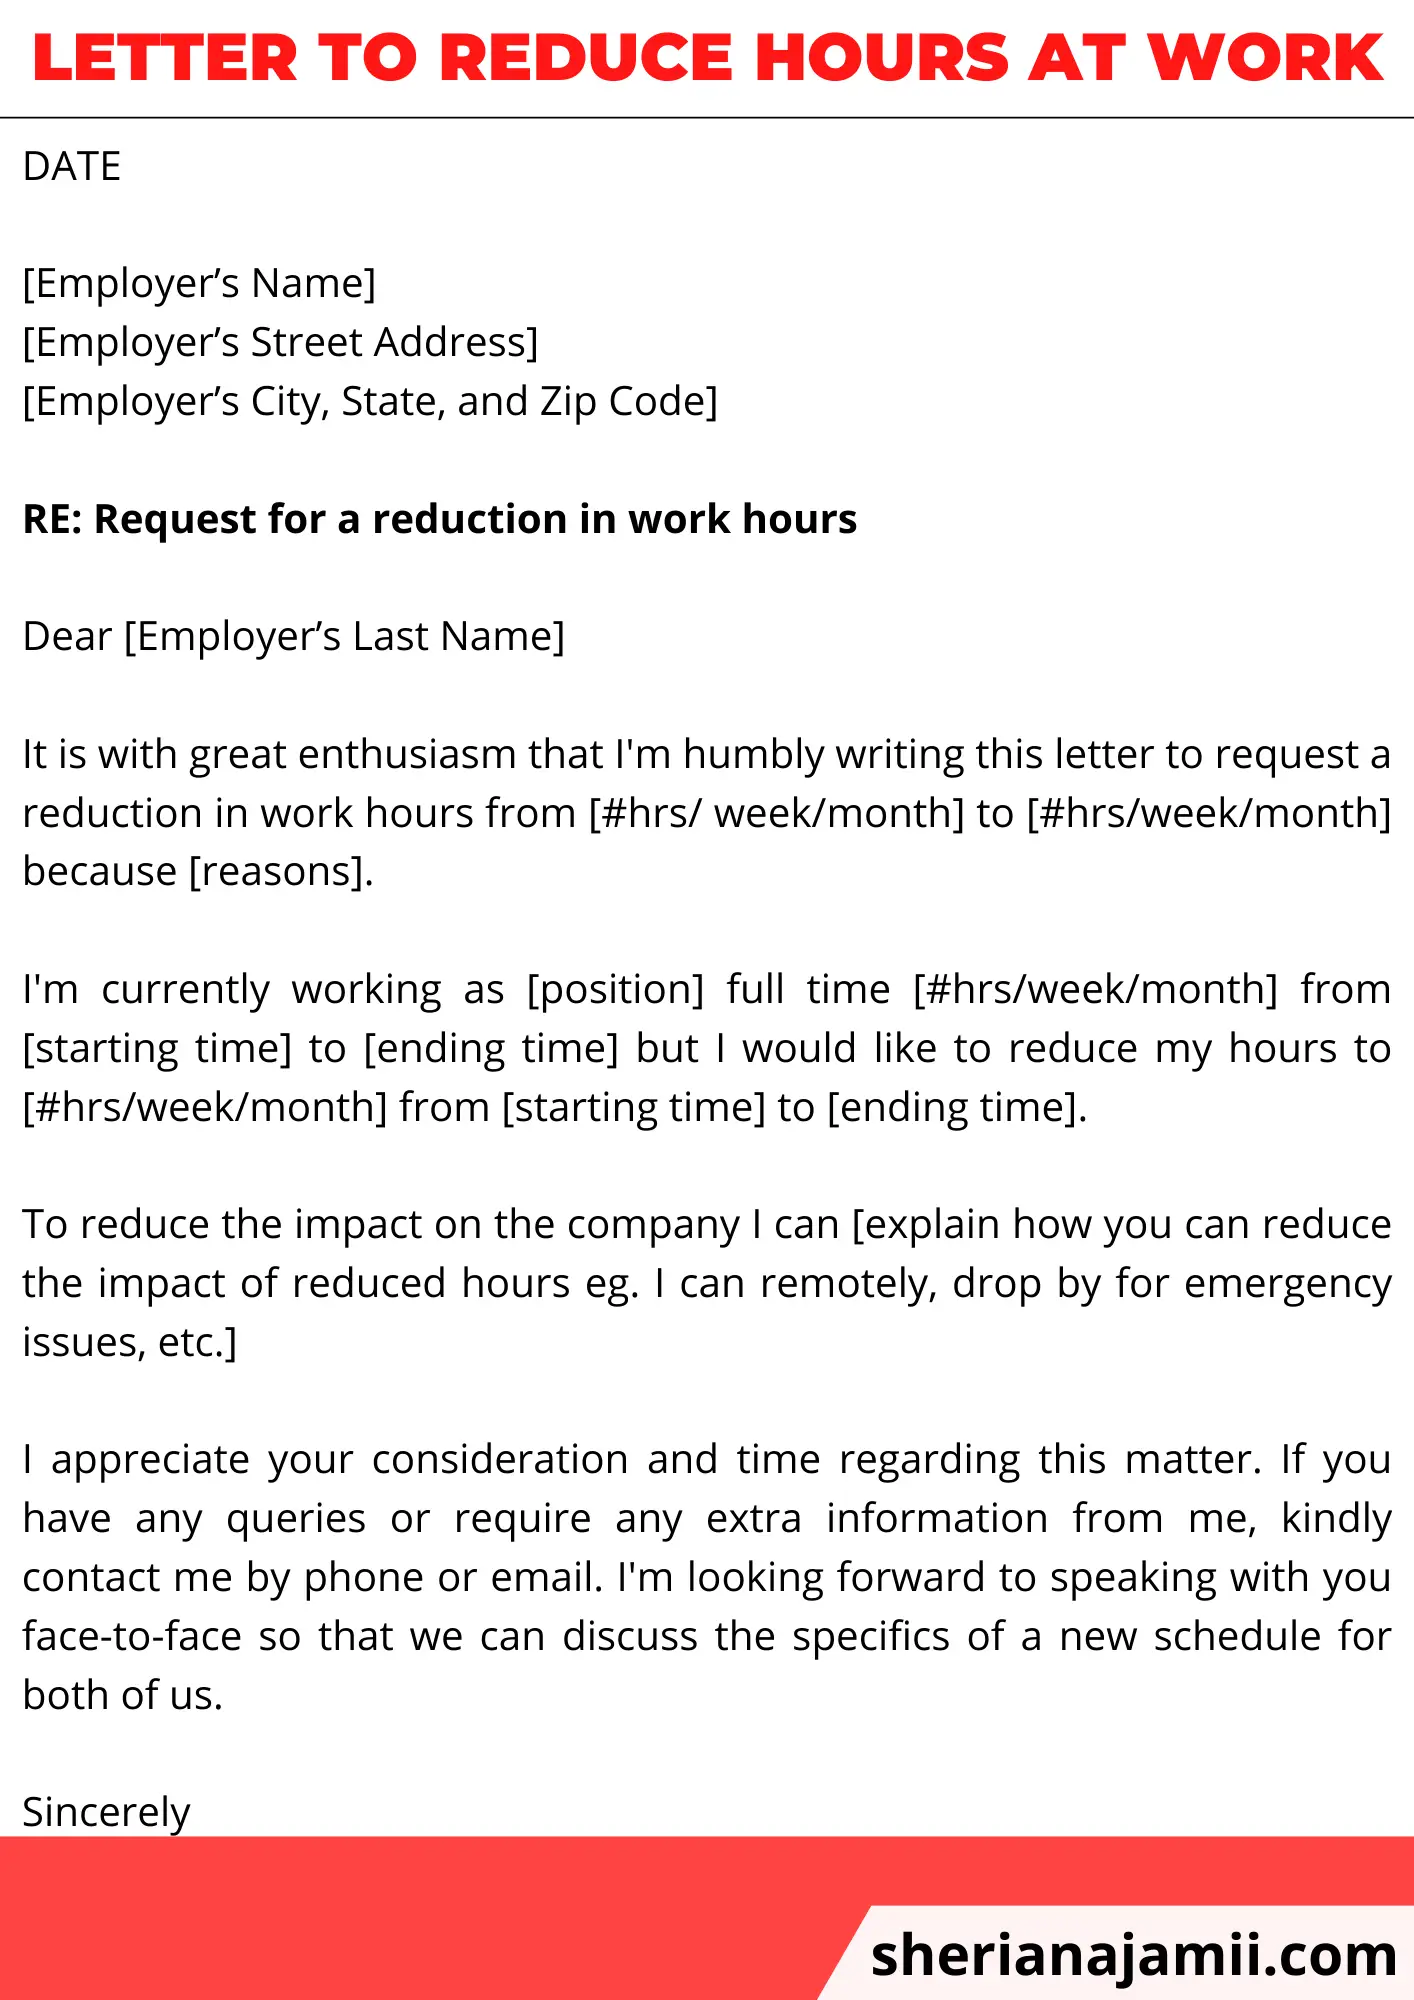 Letter to reduce hours at work, sample letter to reduce hours at work, Letter to reduce hours at work template